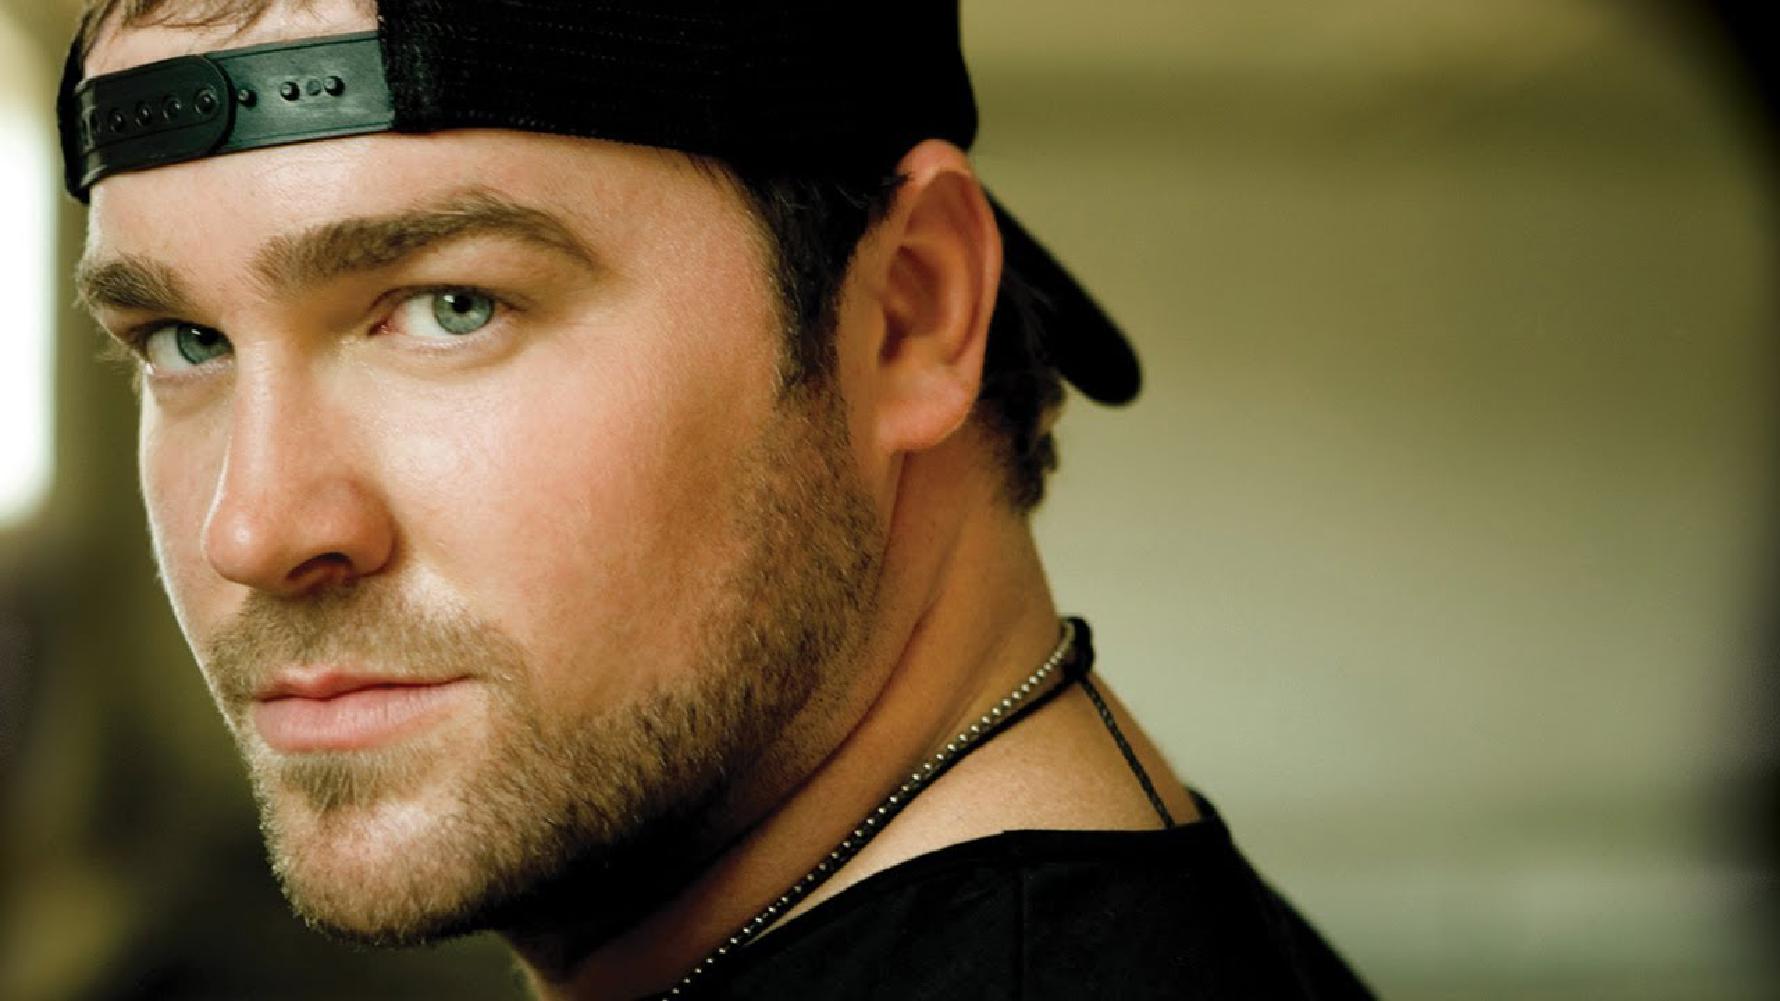 ▷ Lee Brice | Tickets Concerts and Tours 2023 2024 - Wegow